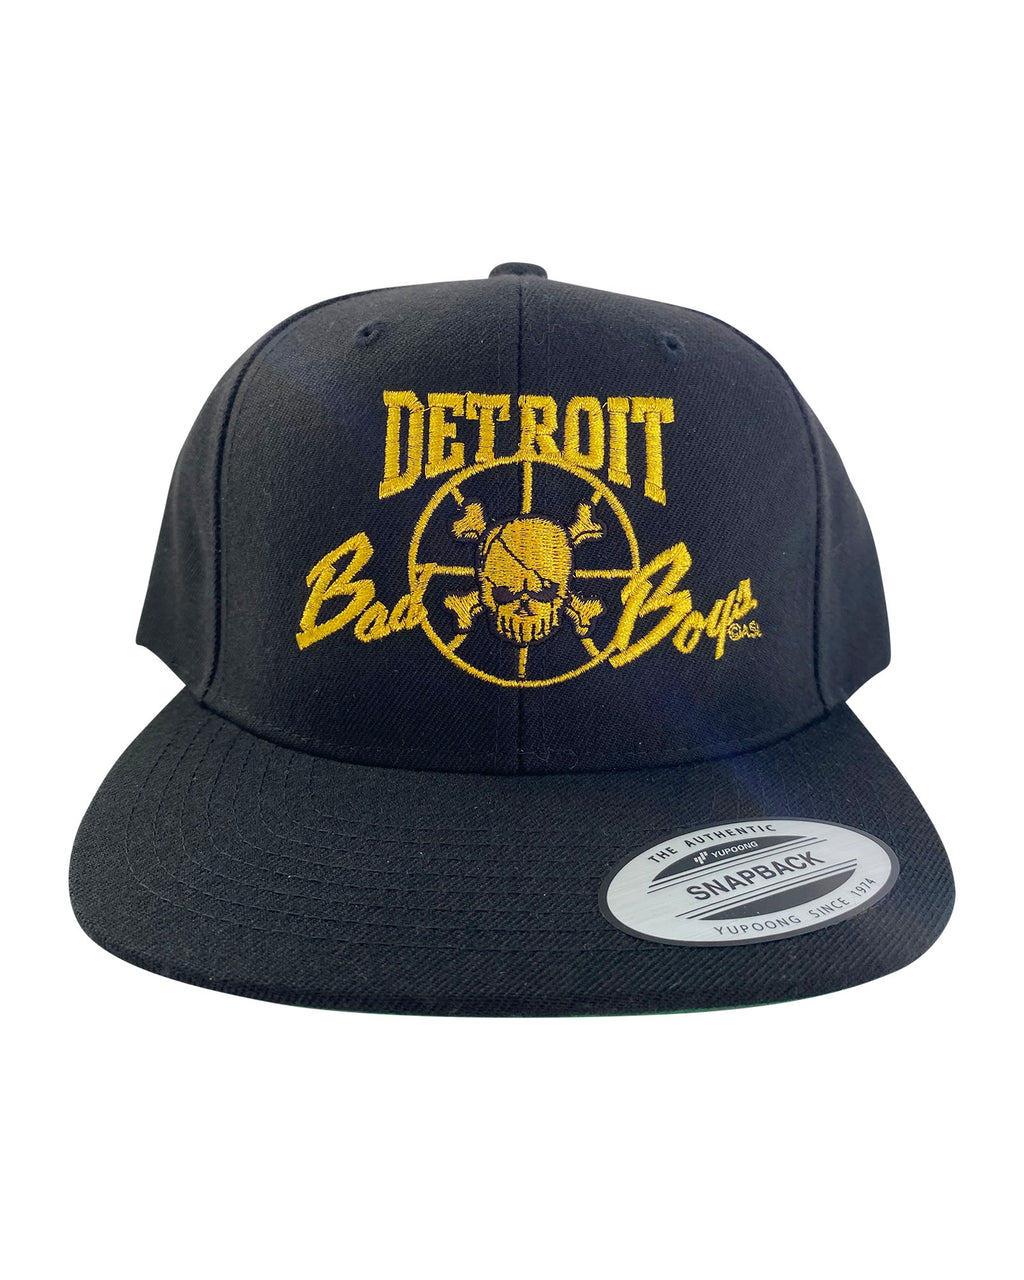 Authentic Detroit Bad Boys Black Snapback Hat with Gold Metallic Embrodiery